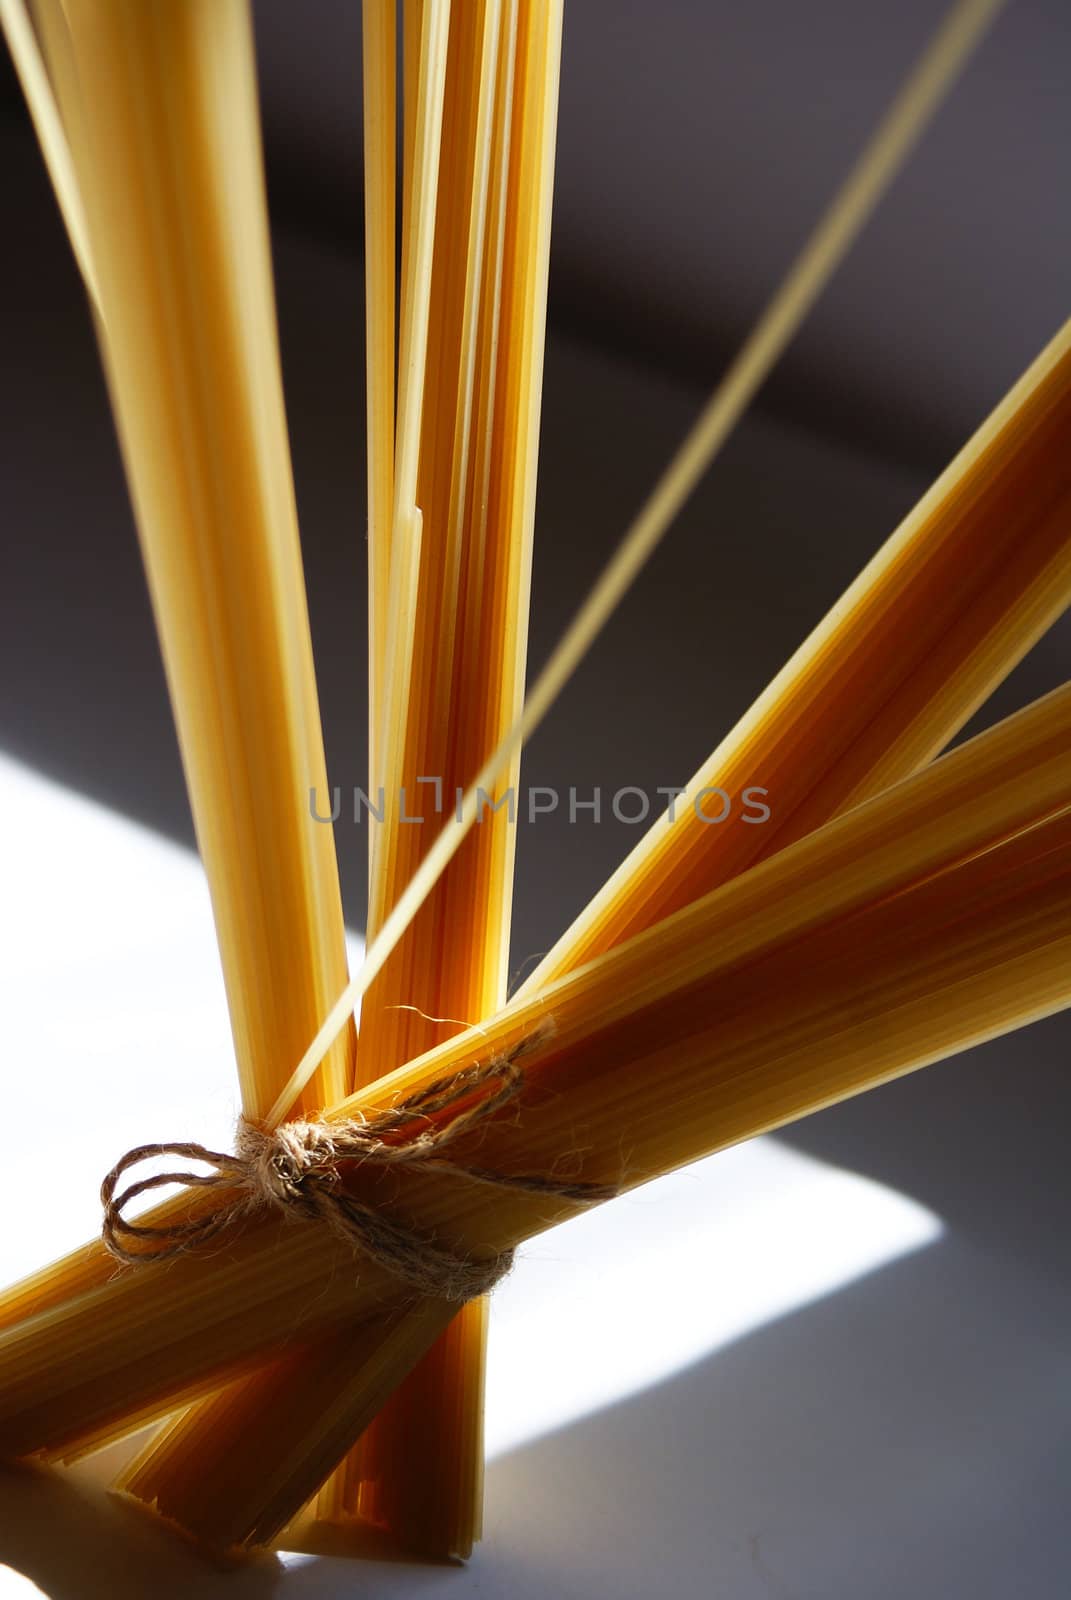 spaghetti pasta tied and sunlit against purple background